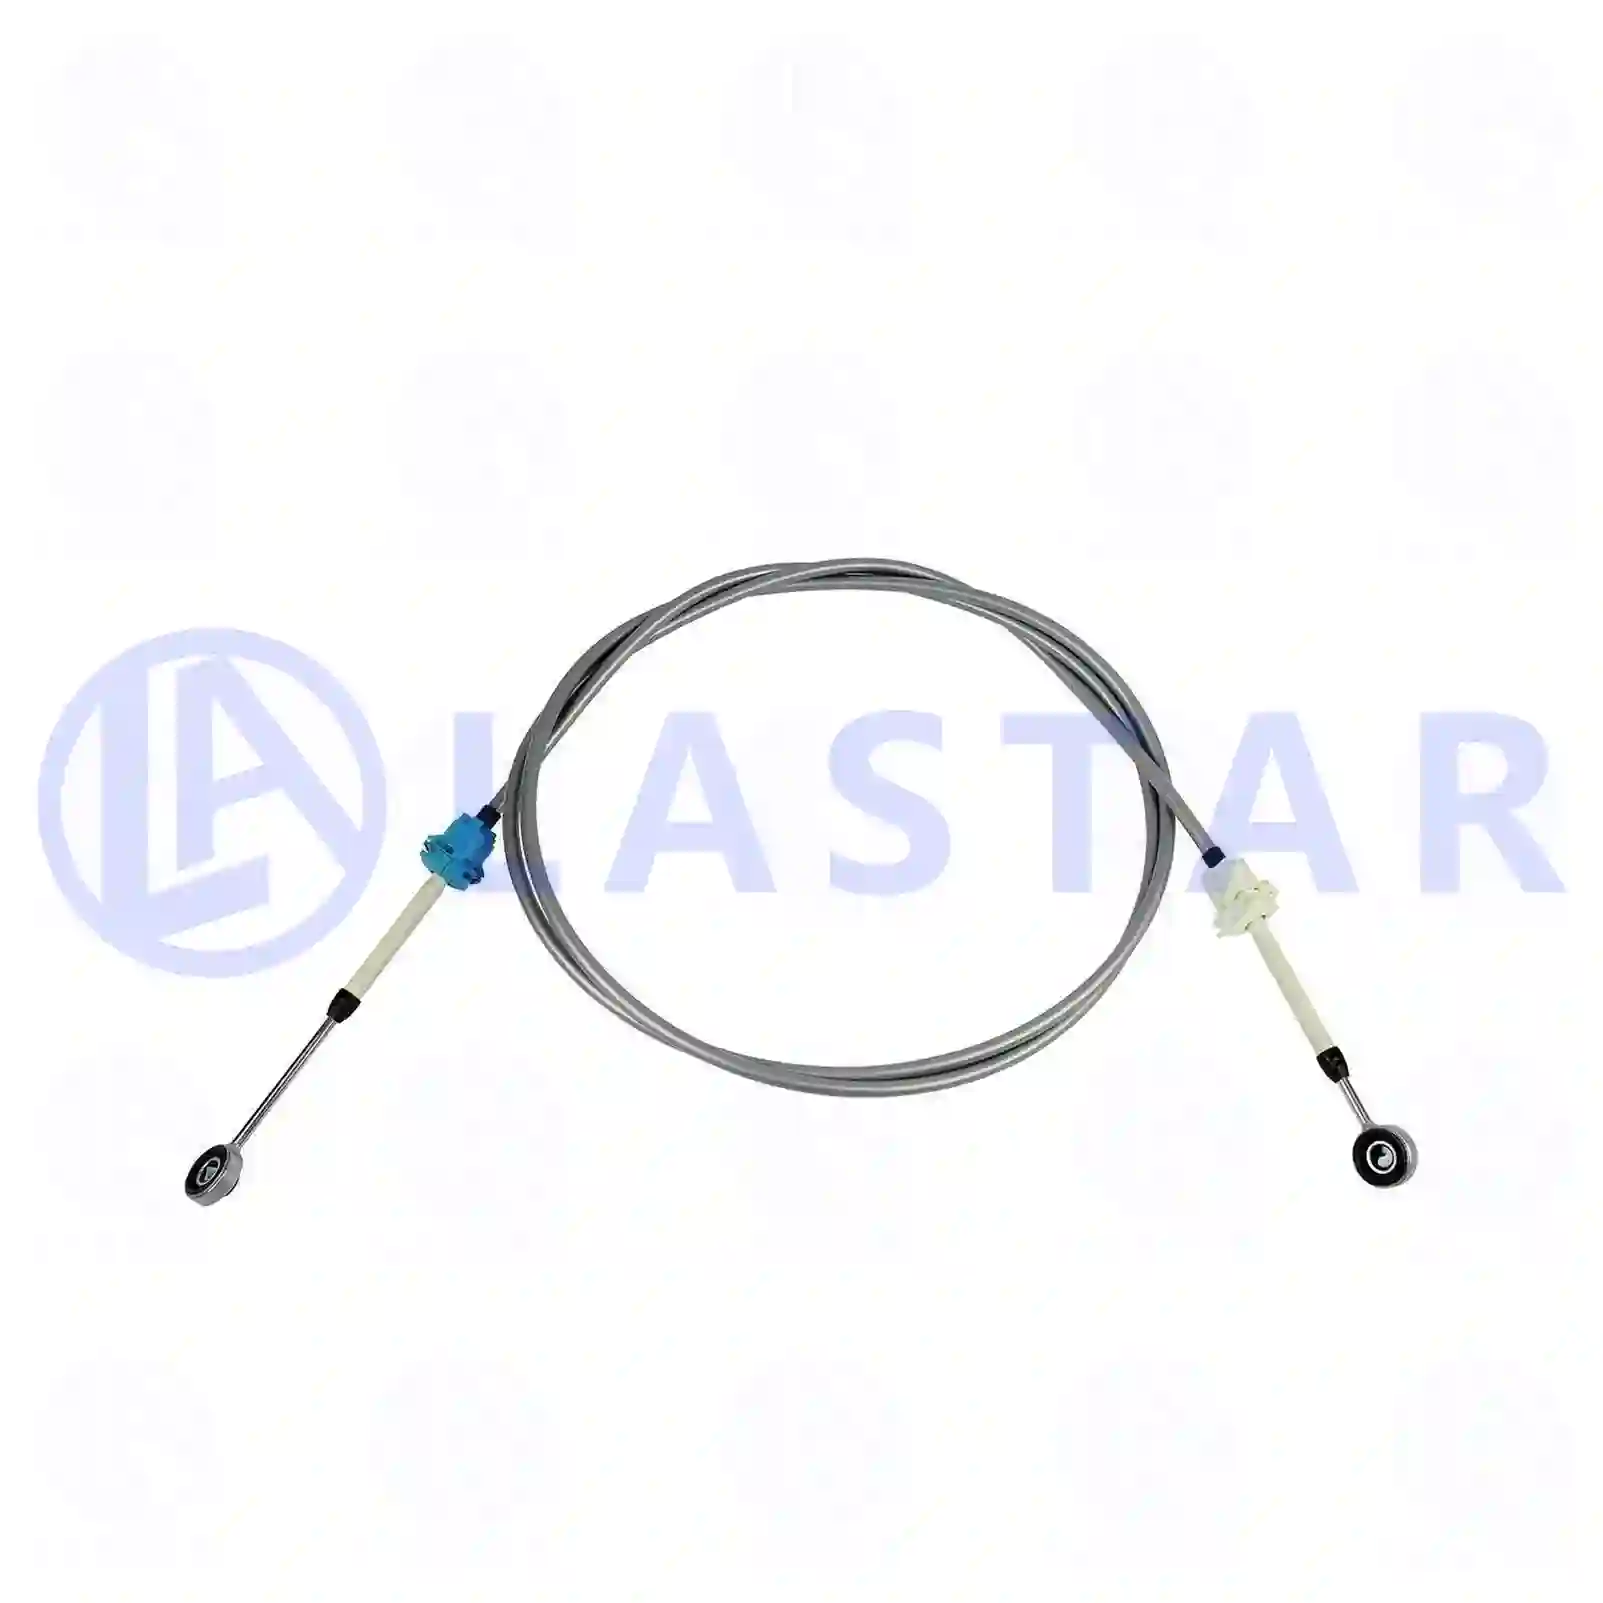 Control cable, switching, 77732679, 20545953, 20702953, 21002853, 21343553, 21789669 ||  77732679 Lastar Spare Part | Truck Spare Parts, Auotomotive Spare Parts Control cable, switching, 77732679, 20545953, 20702953, 21002853, 21343553, 21789669 ||  77732679 Lastar Spare Part | Truck Spare Parts, Auotomotive Spare Parts